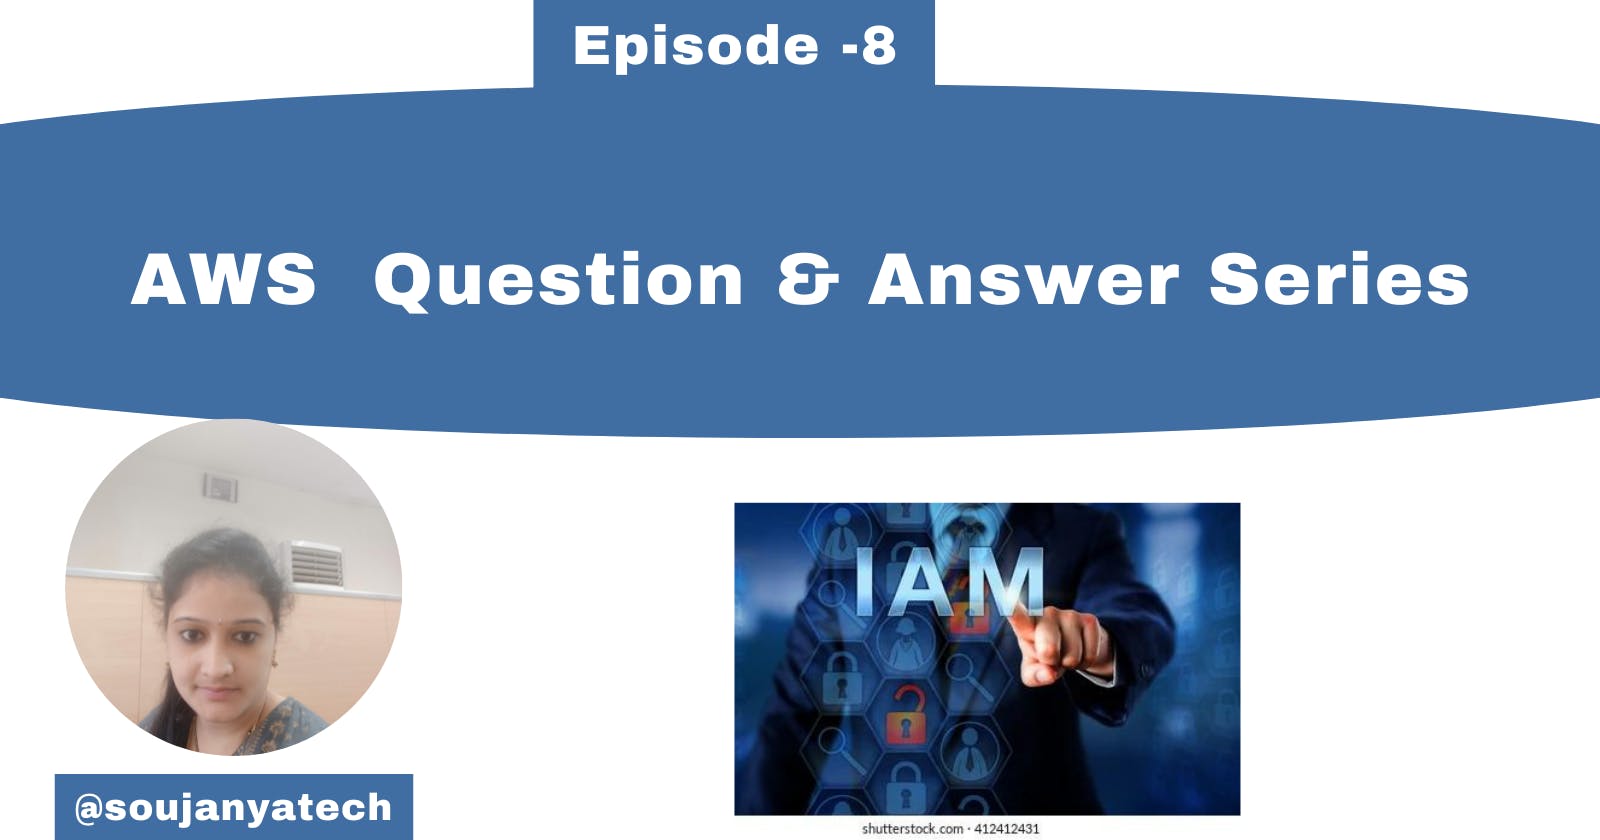 Episode -8 -->AWS Interview Question & Answers